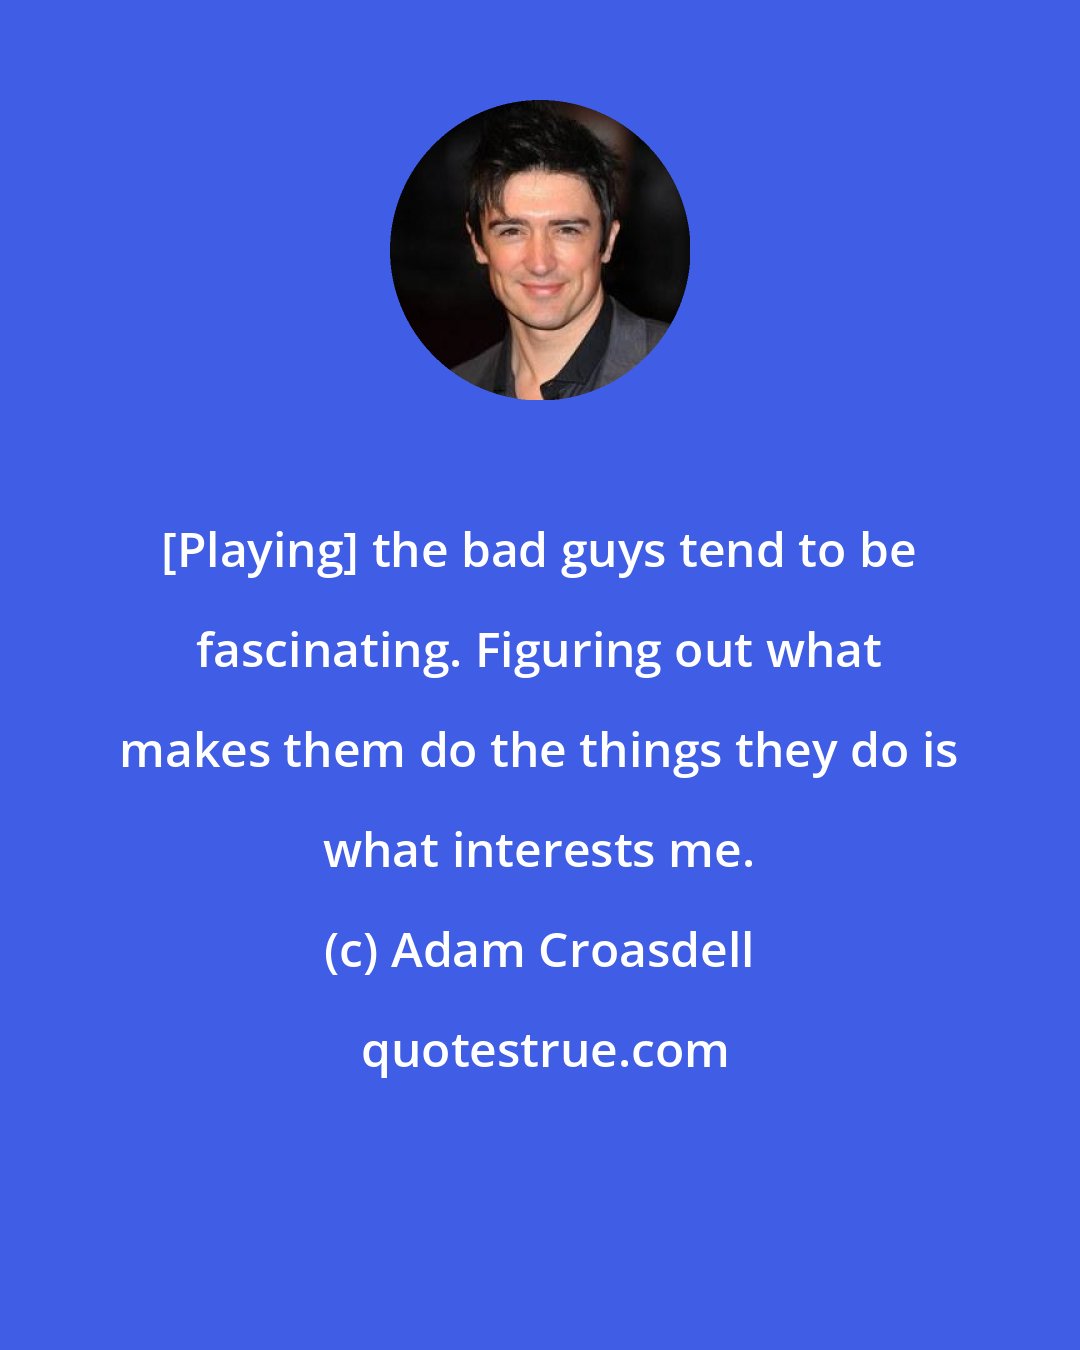 Adam Croasdell: [Playing] the bad guys tend to be fascinating. Figuring out what makes them do the things they do is what interests me.